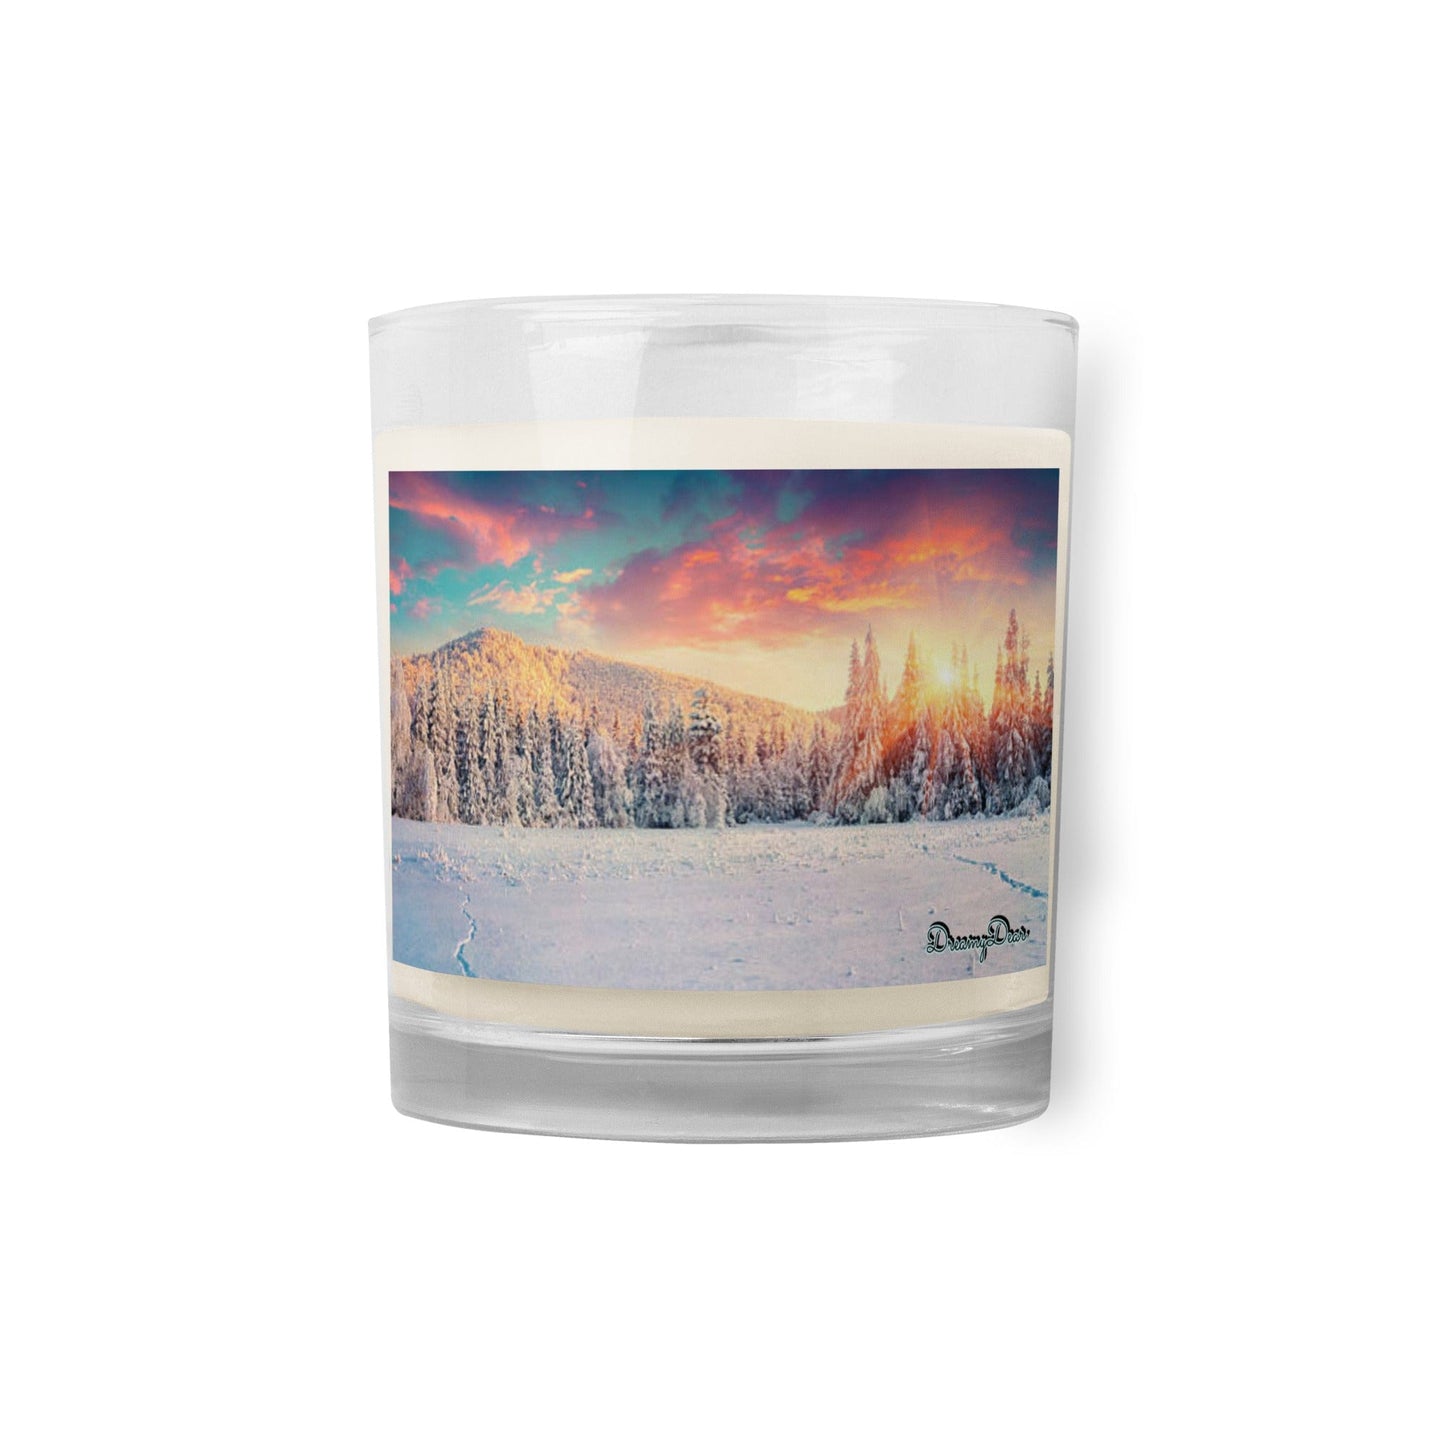 "Sunset Snowfall" soy wax candle